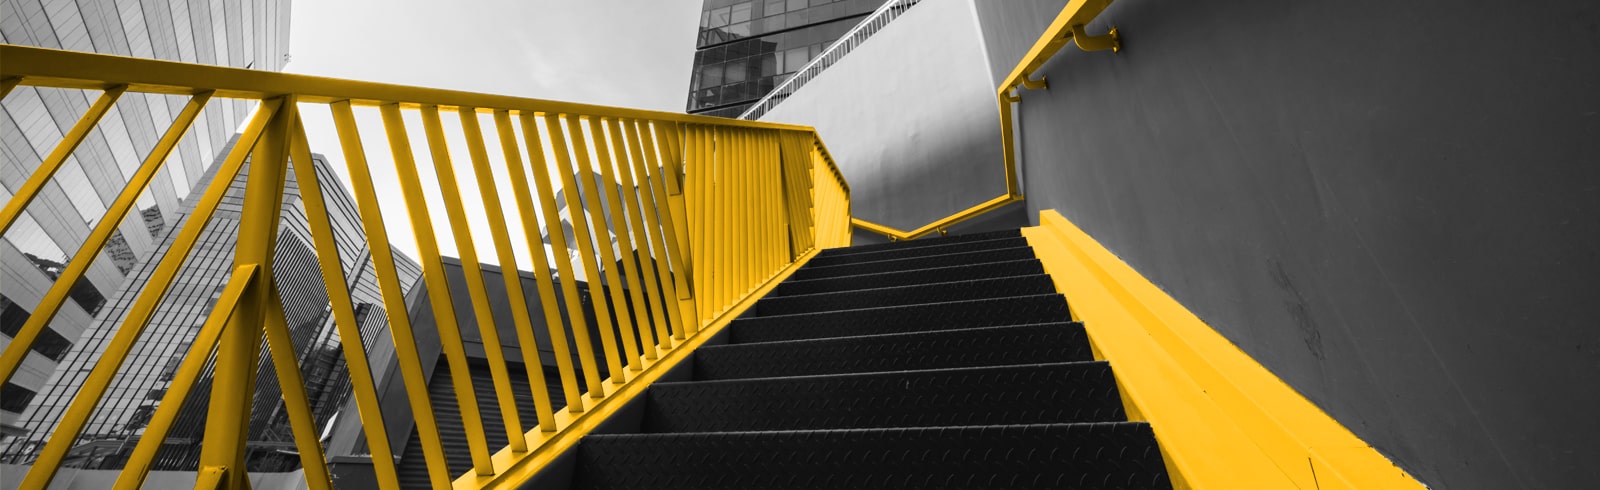 A vivid yellow staircase contrasting against a monochrome urban backdrop, indicating a selective colour technique in architectural photography with a focus on modern design and industrial aesthetics.